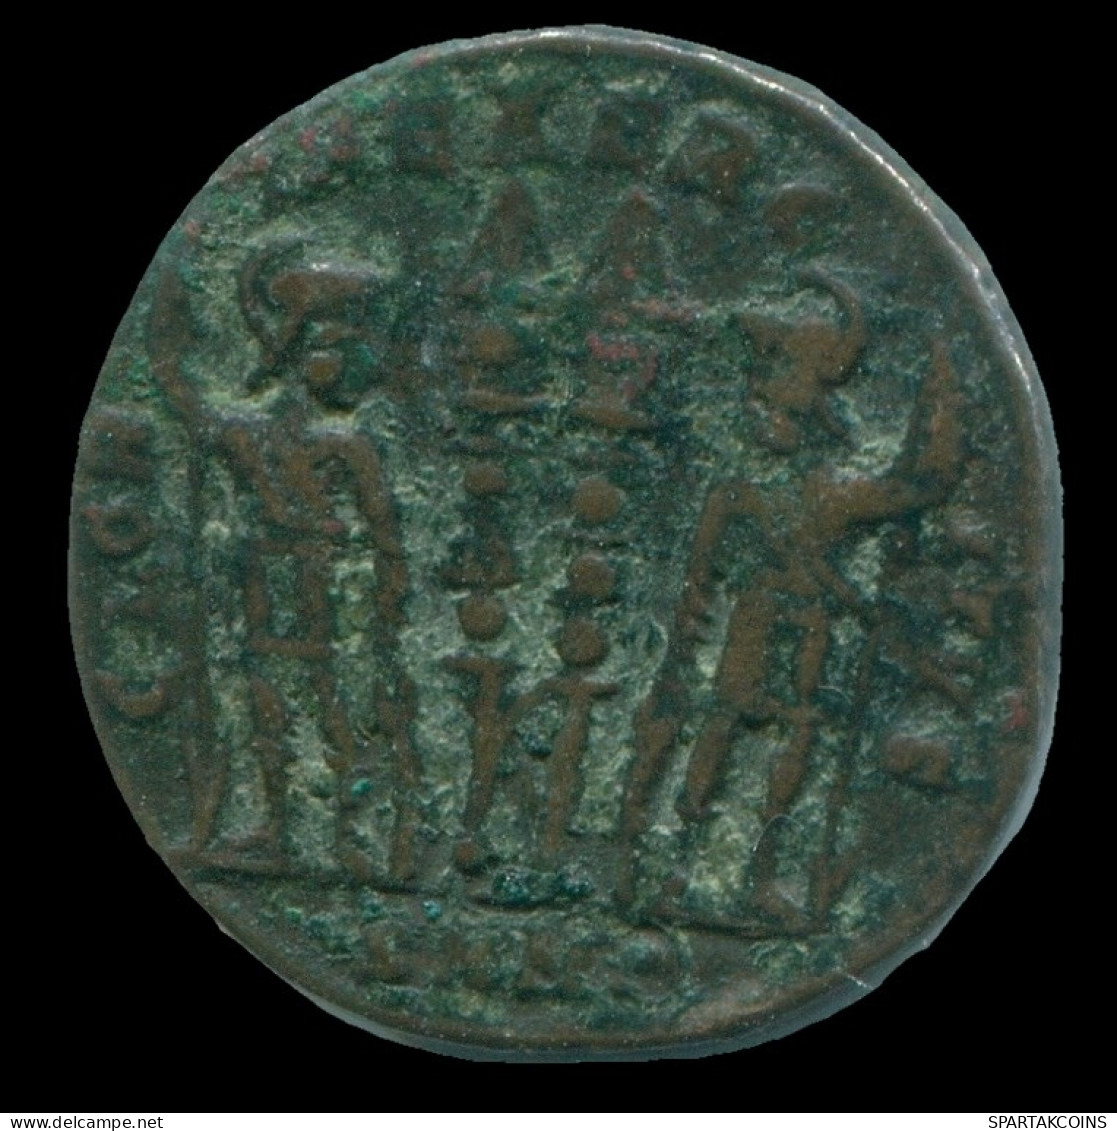 CONSTANTINE I NICOMEDIA Mint ( SMN ) TWO SOLDIERS #ANC13185.18.U.A - The Christian Empire (307 AD Tot 363 AD)